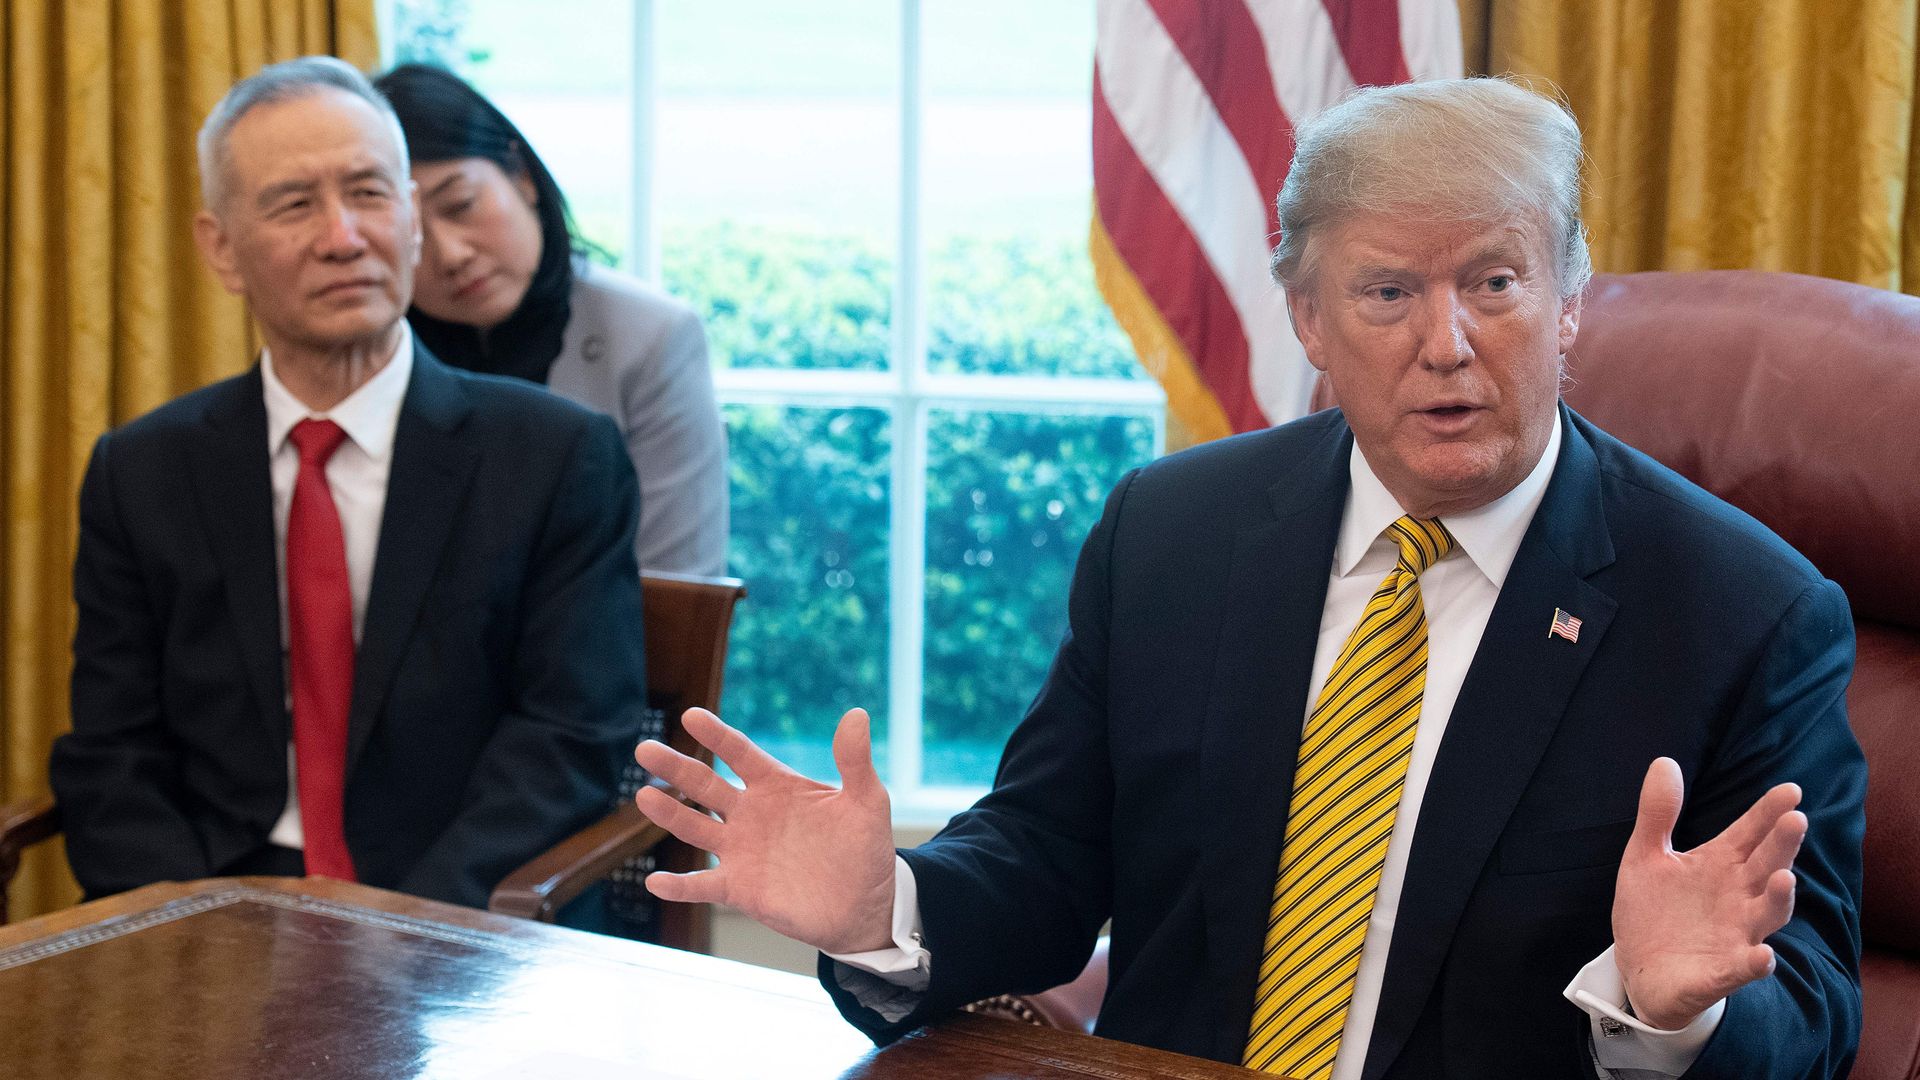 President Trump (R) speaks during a trade meeting with China's Vice Premier Liu He (L) in the Oval Office at the White House in Washington, DC, on April 4.